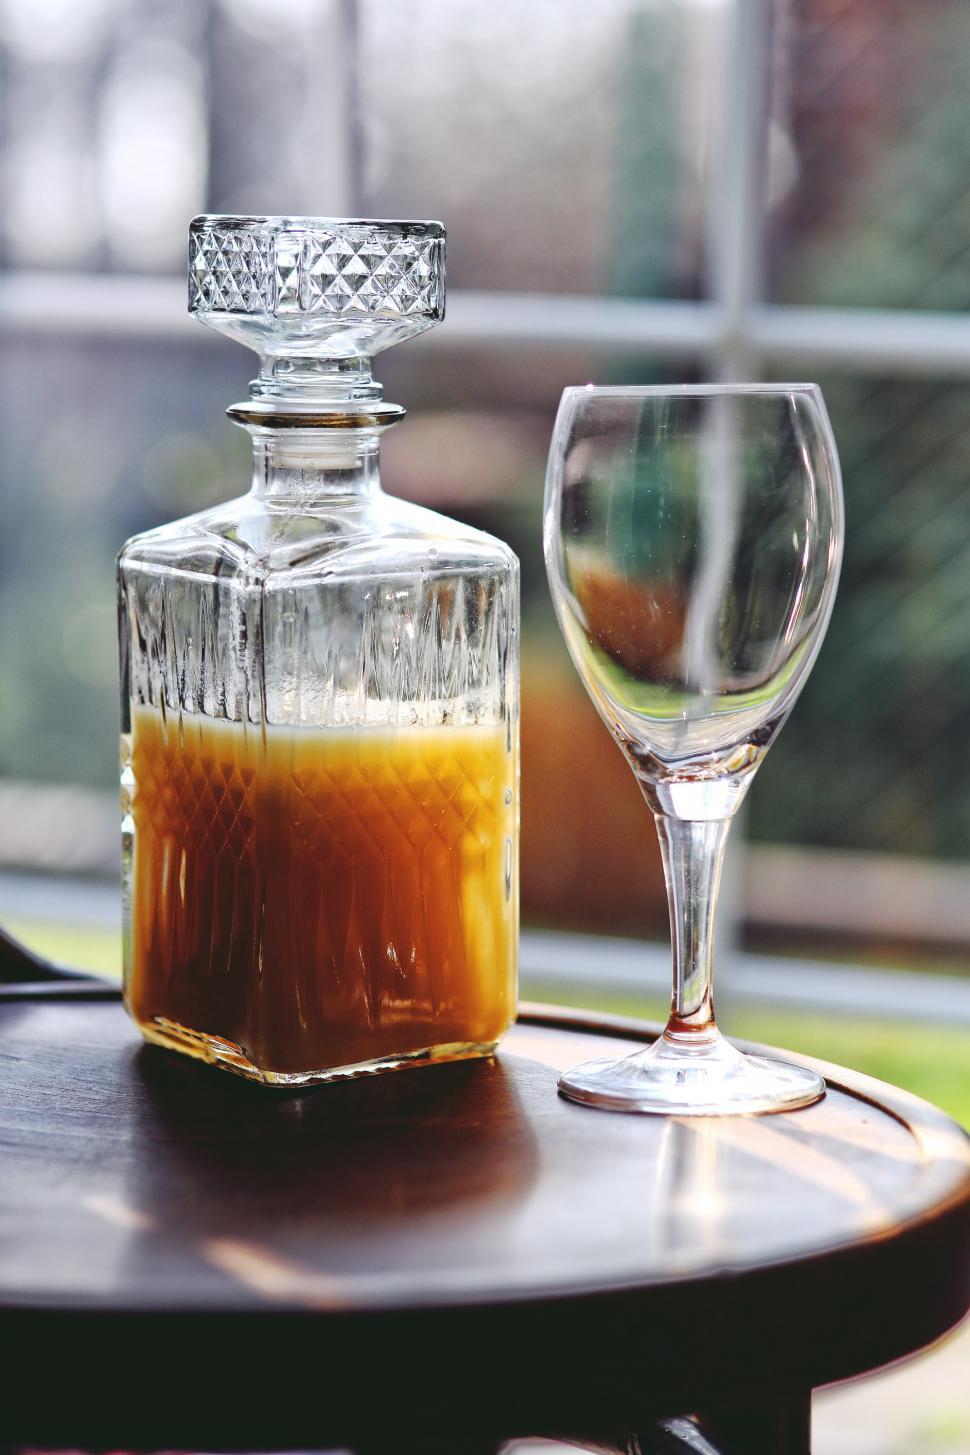 Free Image of Bottle of Alcohol and Glass on Table 